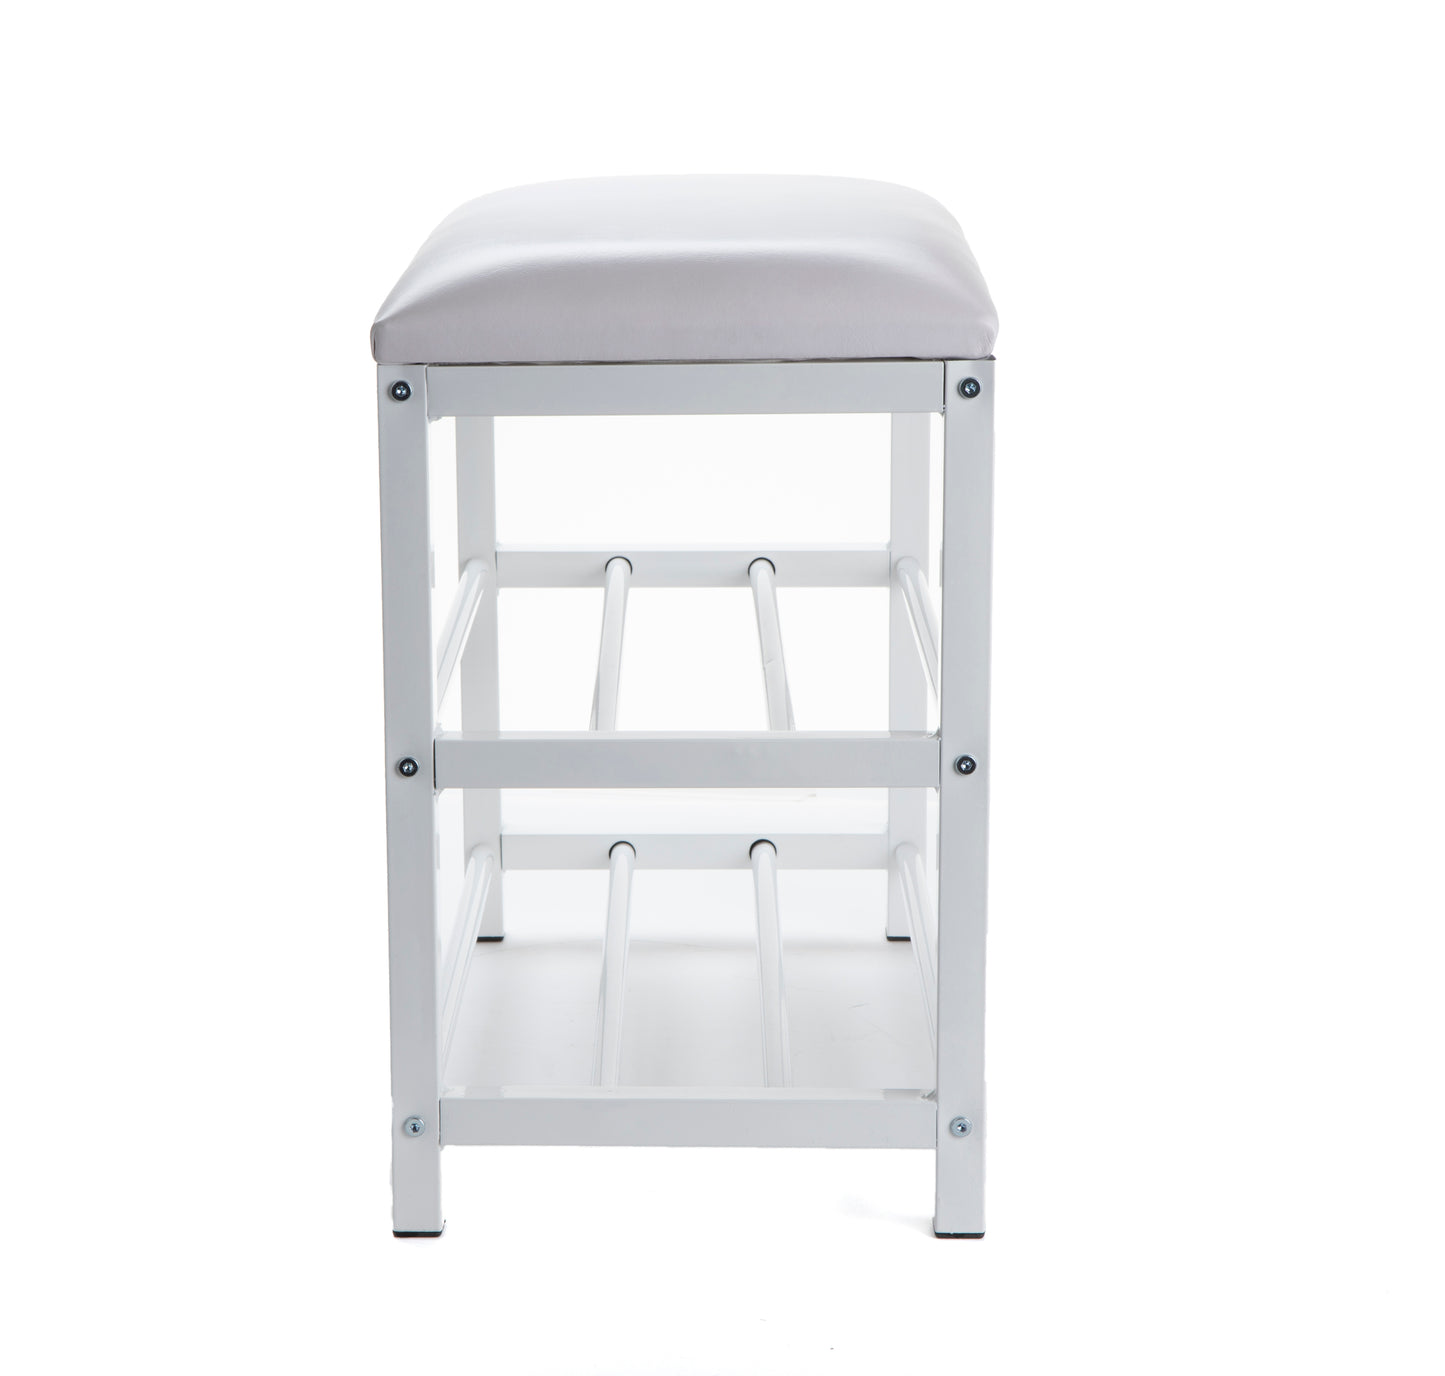 Mind Reader Woodland Collection, 3-Tier Bench, 2 Shoe and Accessory Shelves, Padded Top, Mudroom, Entryway, Bedroom, Metal, White